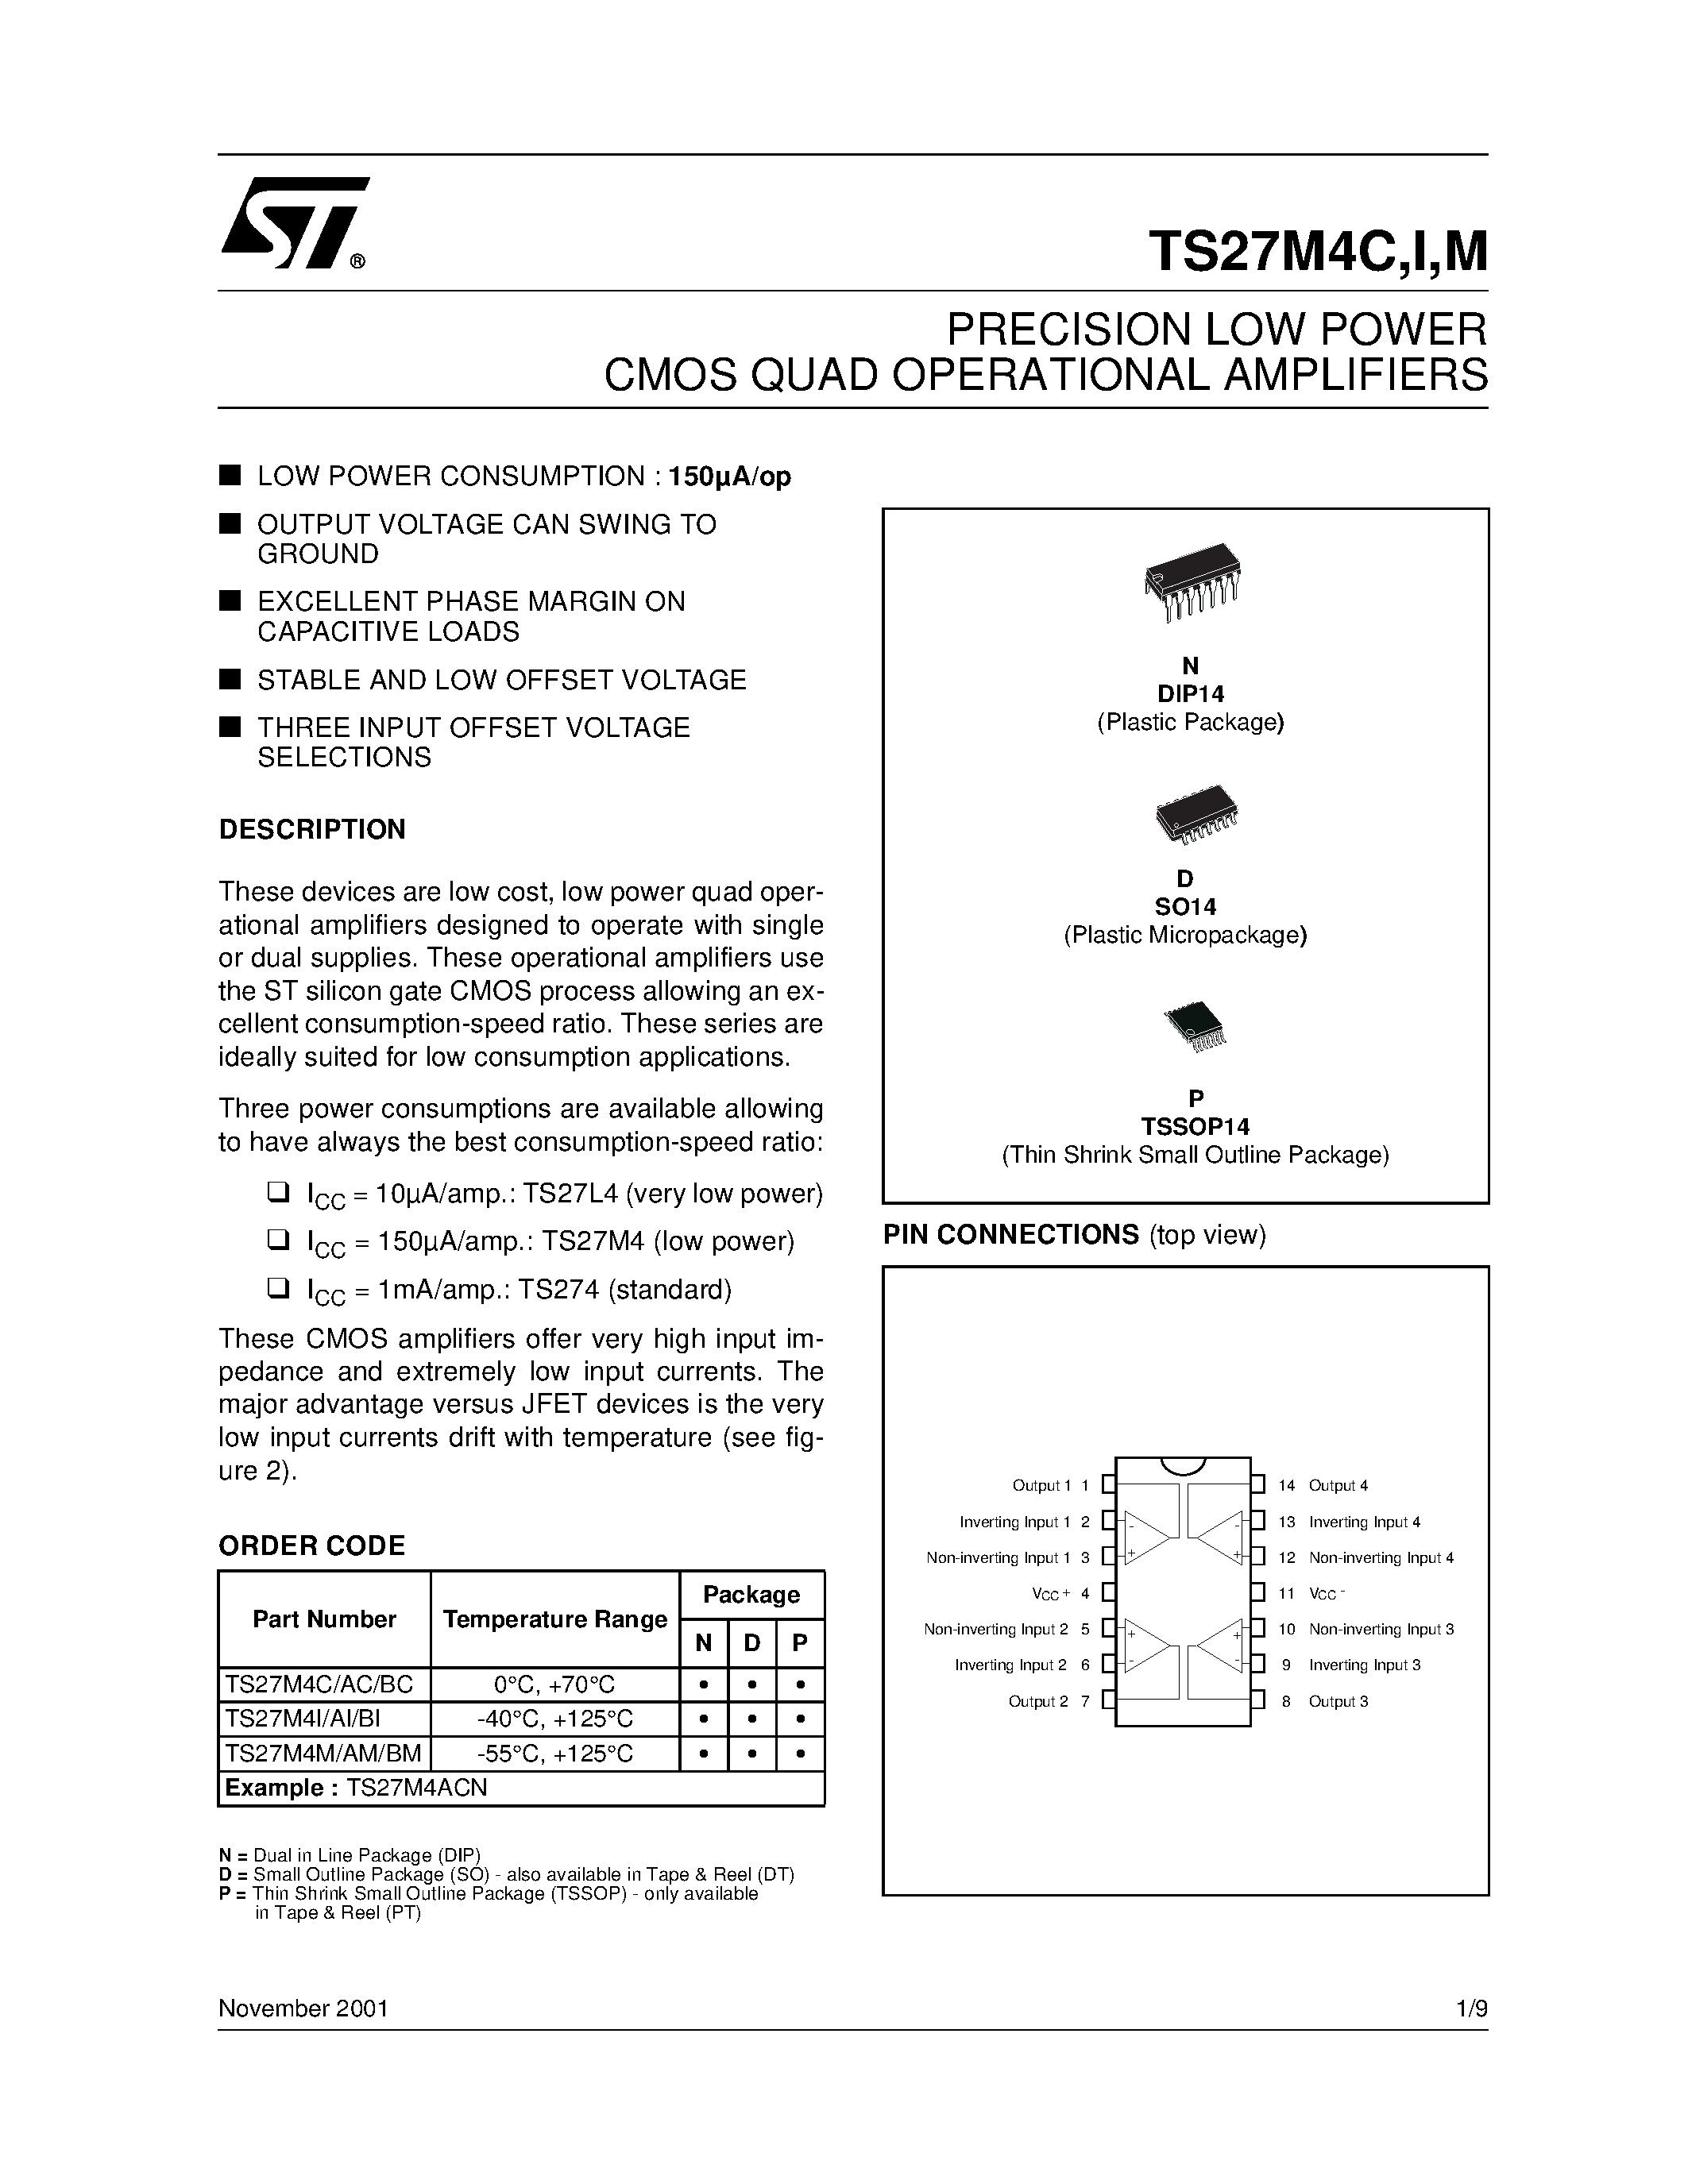 Datasheet TS27M4C - PRECISION LOW POWER CMOS QUAD OPERATIONAL AMPLIFIERS page 1